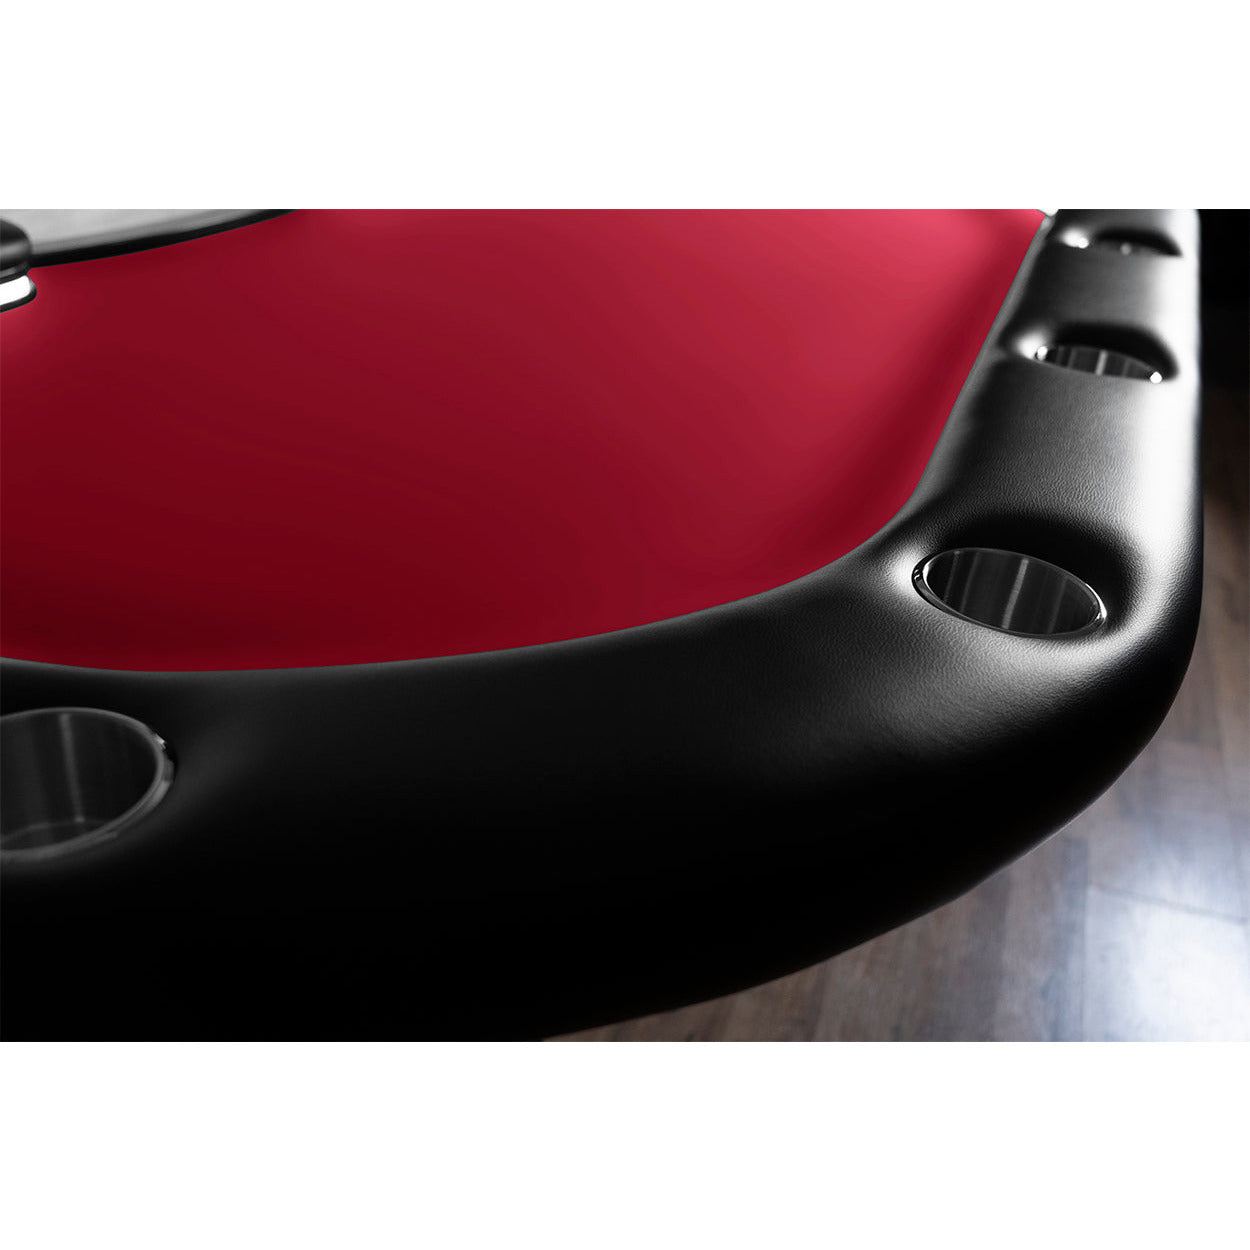 BBO The Aces Pro Alpha Folding Poker Table red close up of corner